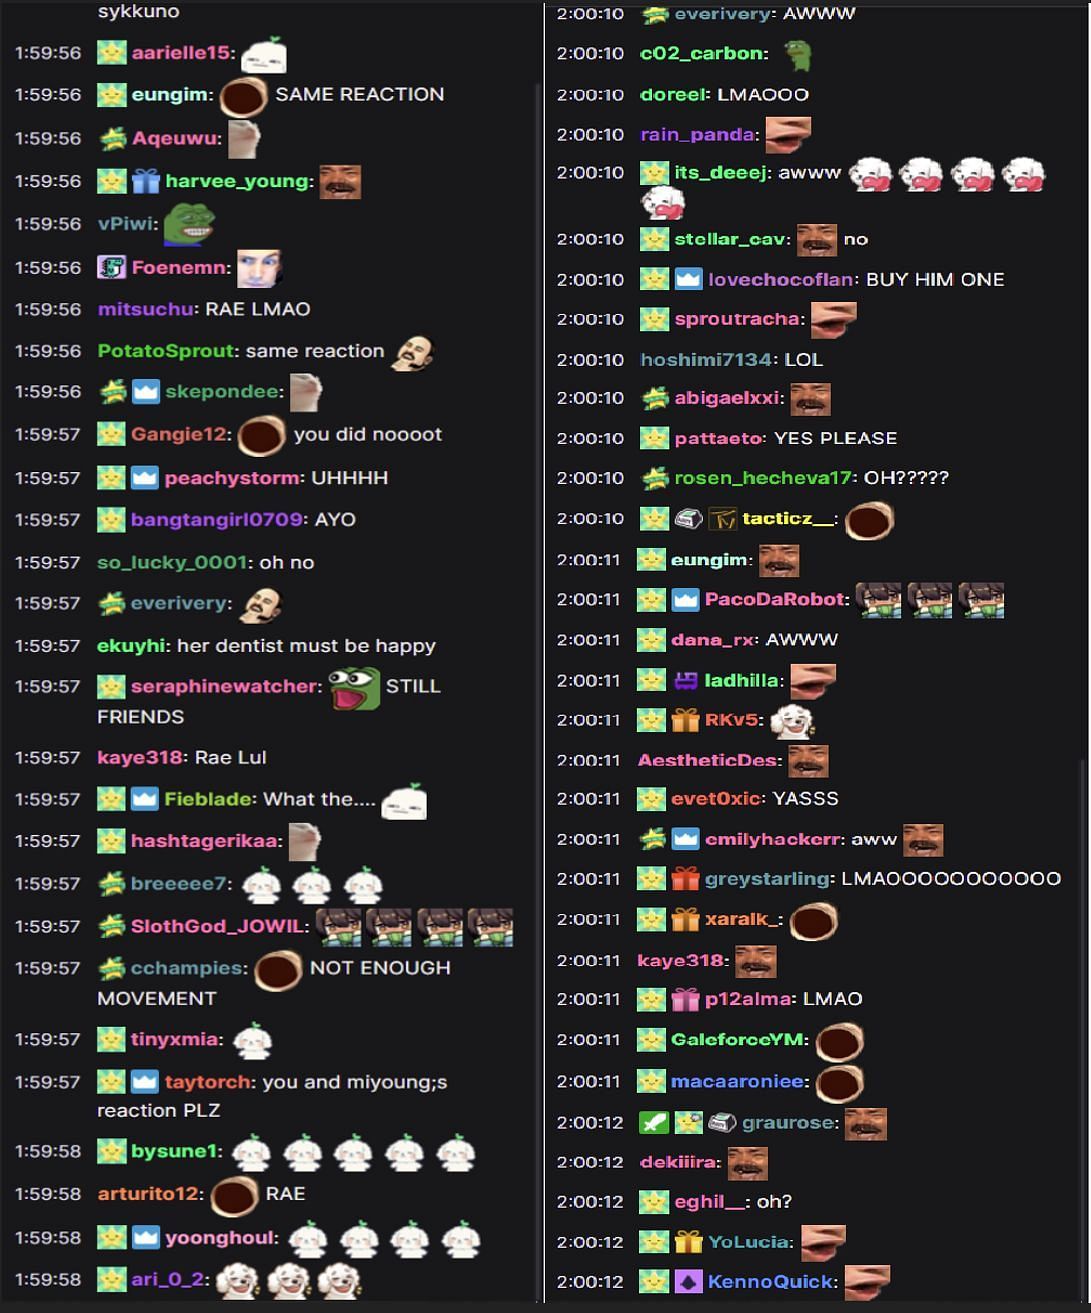 Fans reacting to the streamer&#039;s reaction (Images via Sykkuno/Twitch chat)